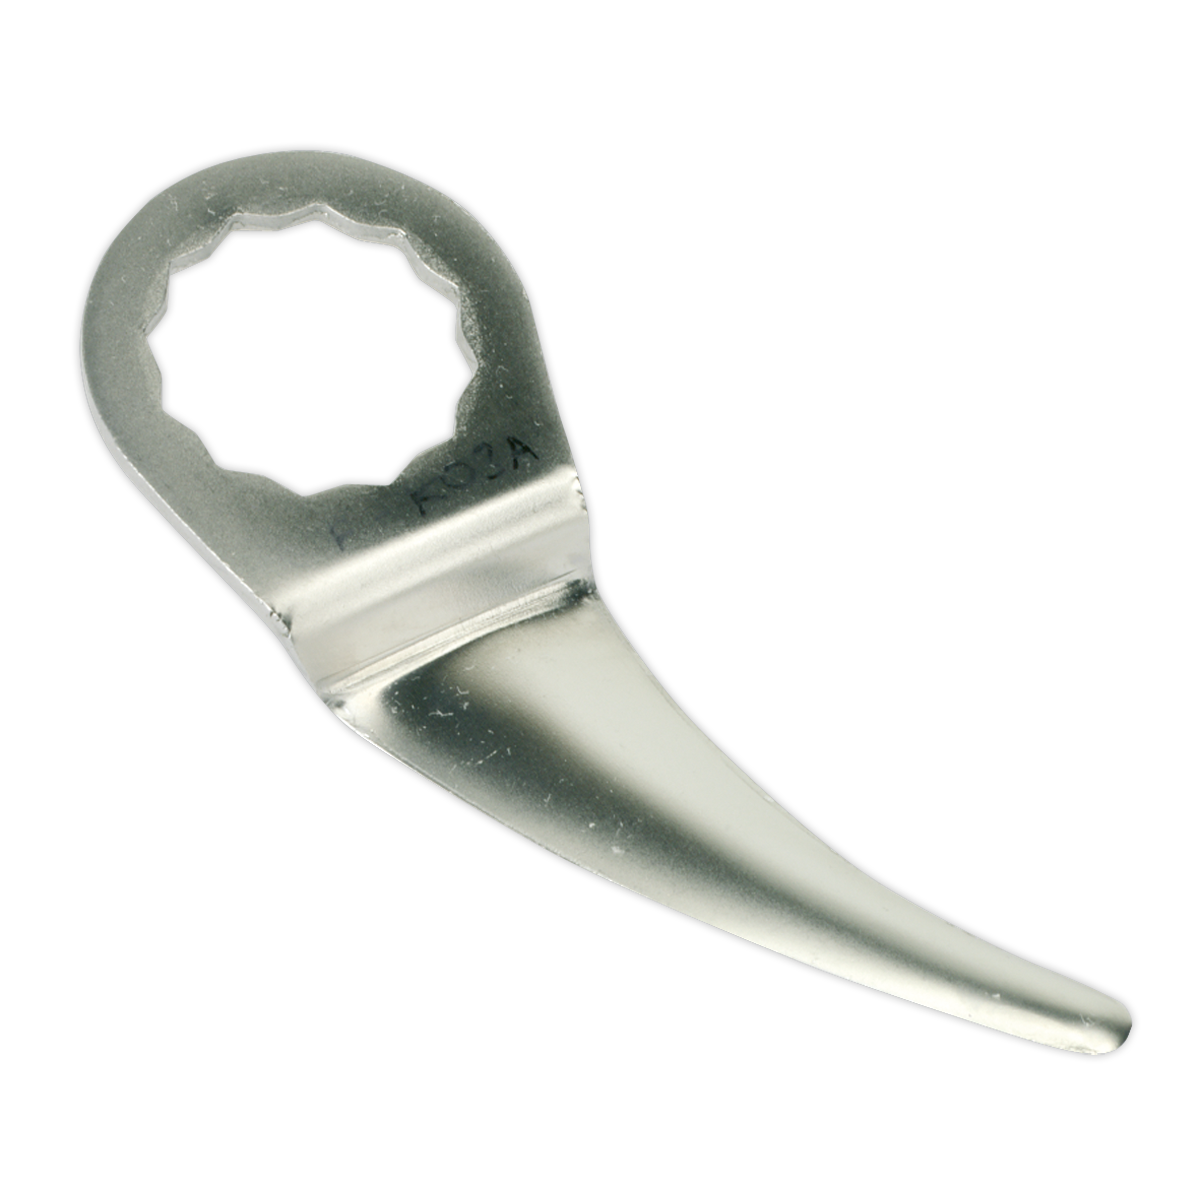 Sealey Air Knife Blade - 50mm - Offset Curved